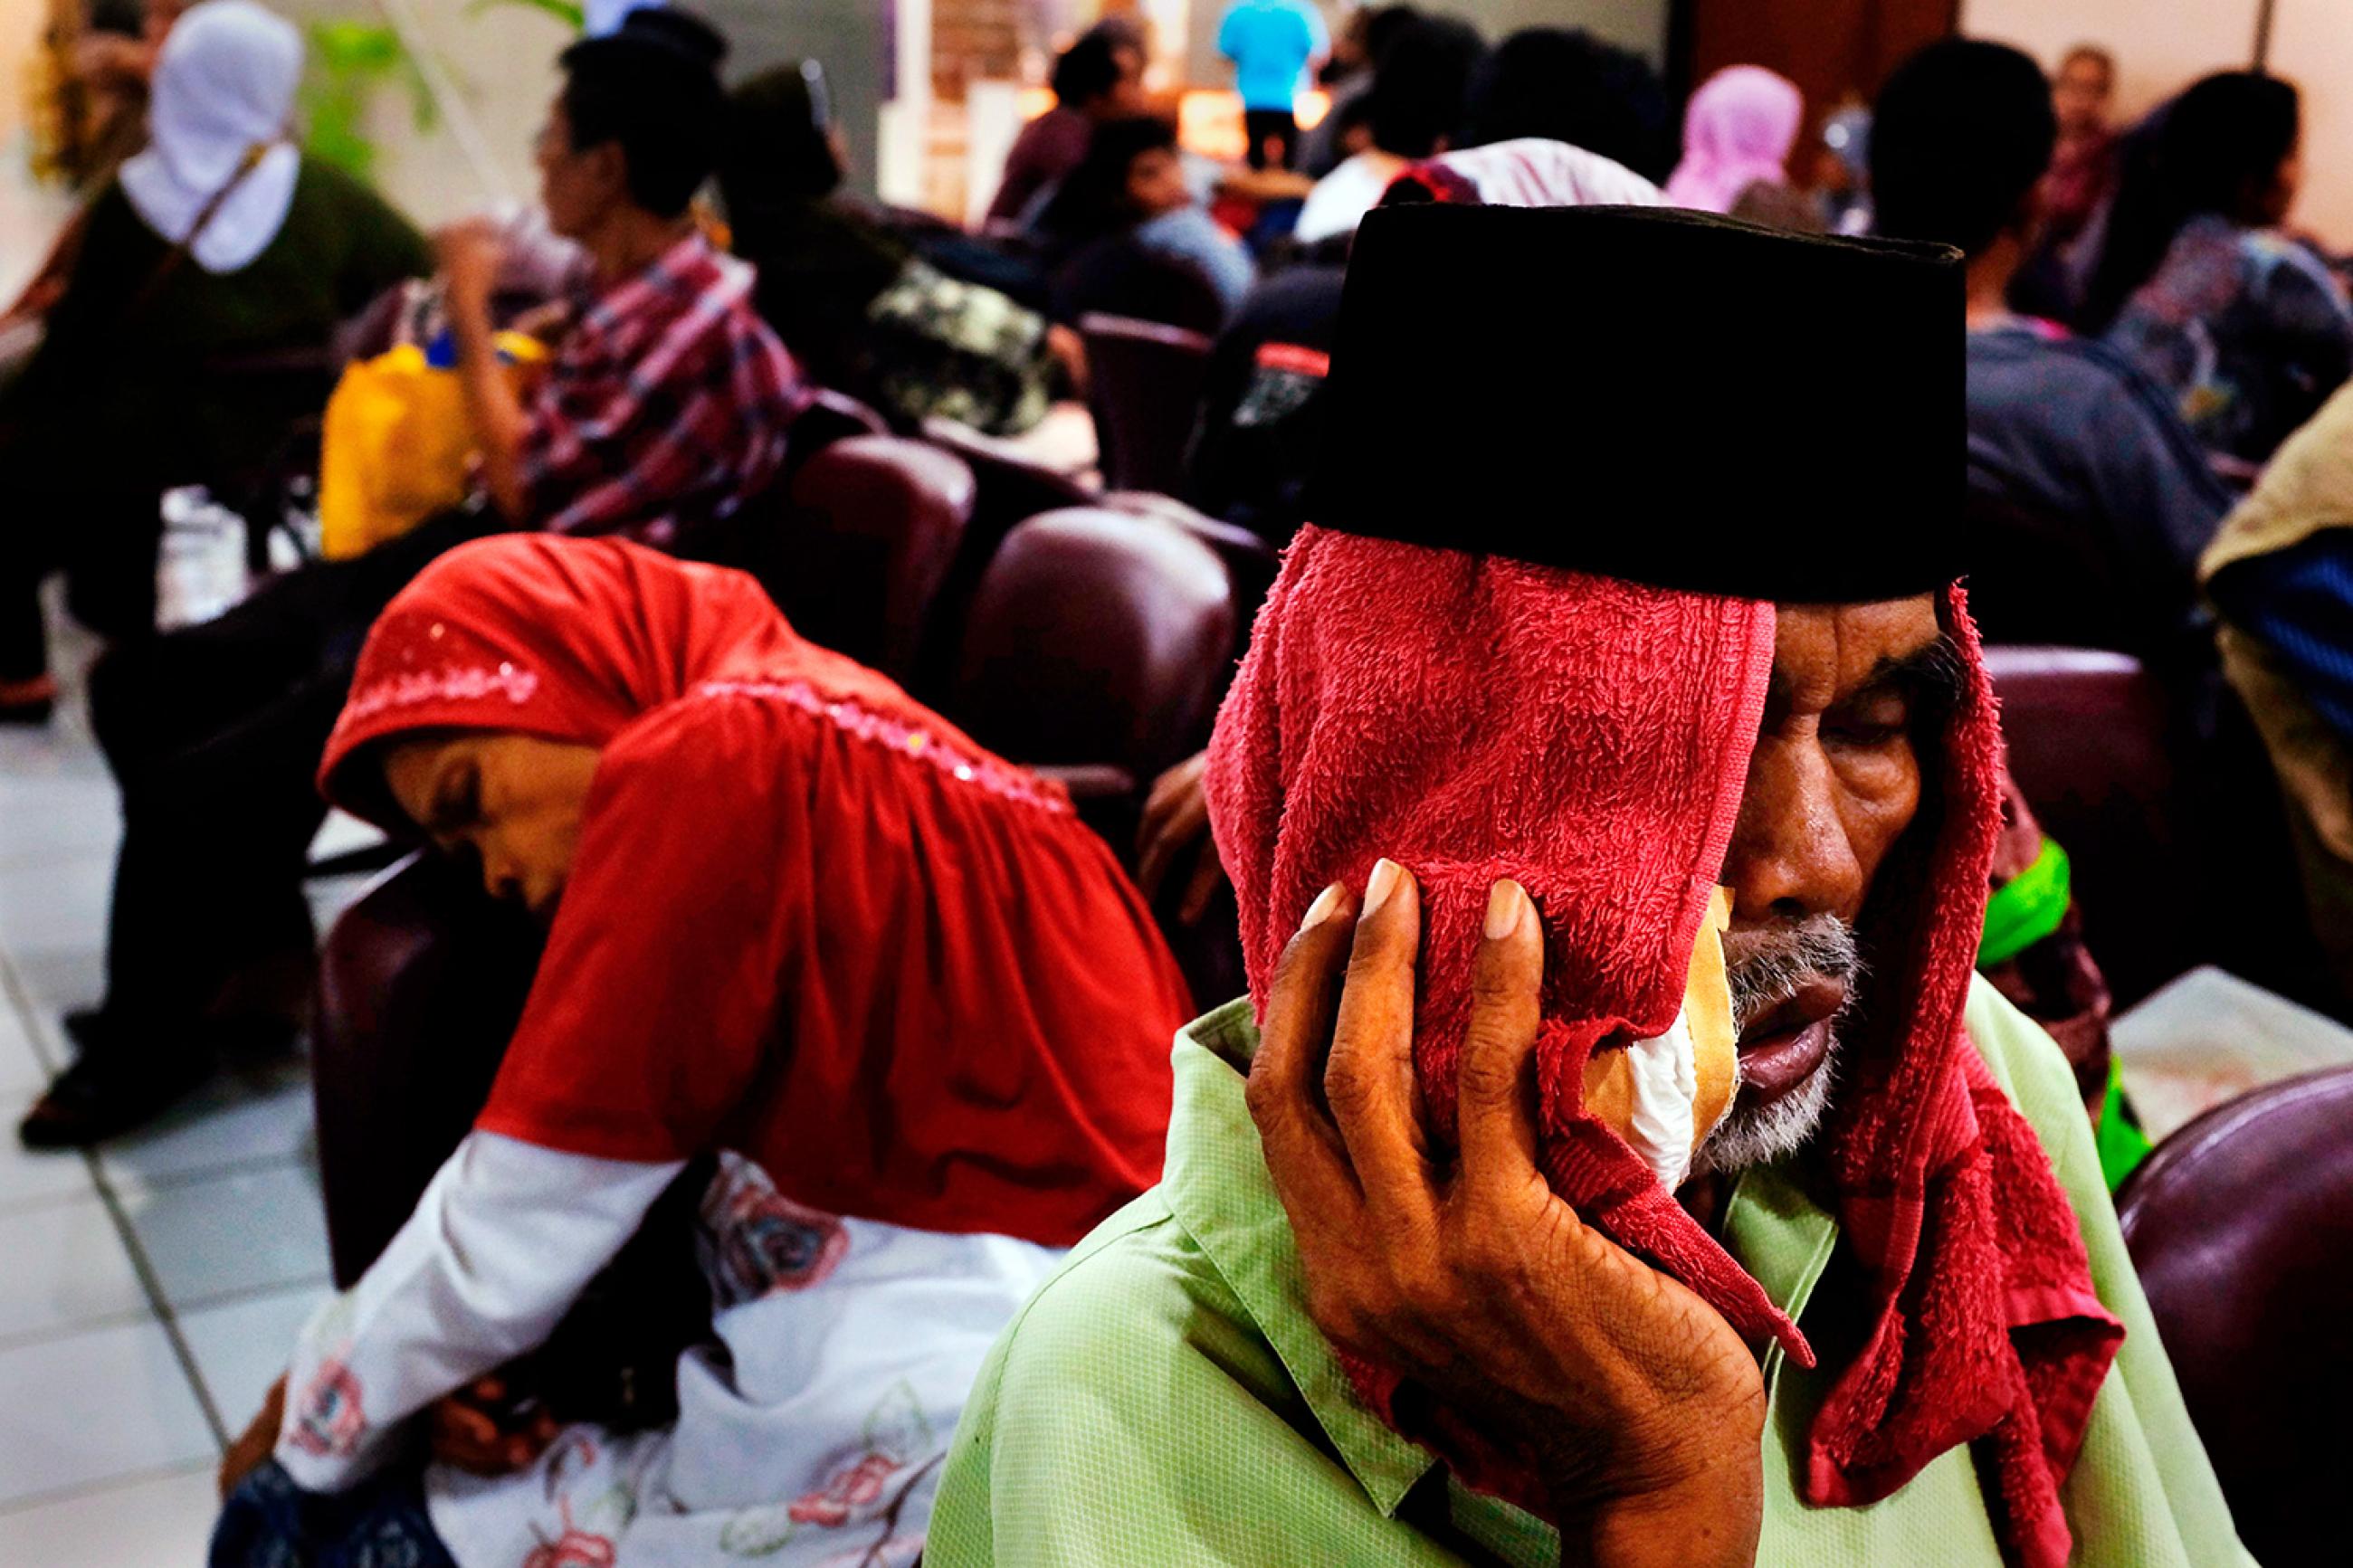 People waiting at Fatmawati hospital in Jakarta on May 17, 2013, after Indonesia announced plans to implement nationwide health care, with the aim to covering all Indonesians by the end of the decade. The picture shows a crowded waiting room with a man in the foreground with a red cloth draped over his head and holding what appears to be a bag of ice against his cheek. He looks like he is suffering. REUTERS/Beawiharta.